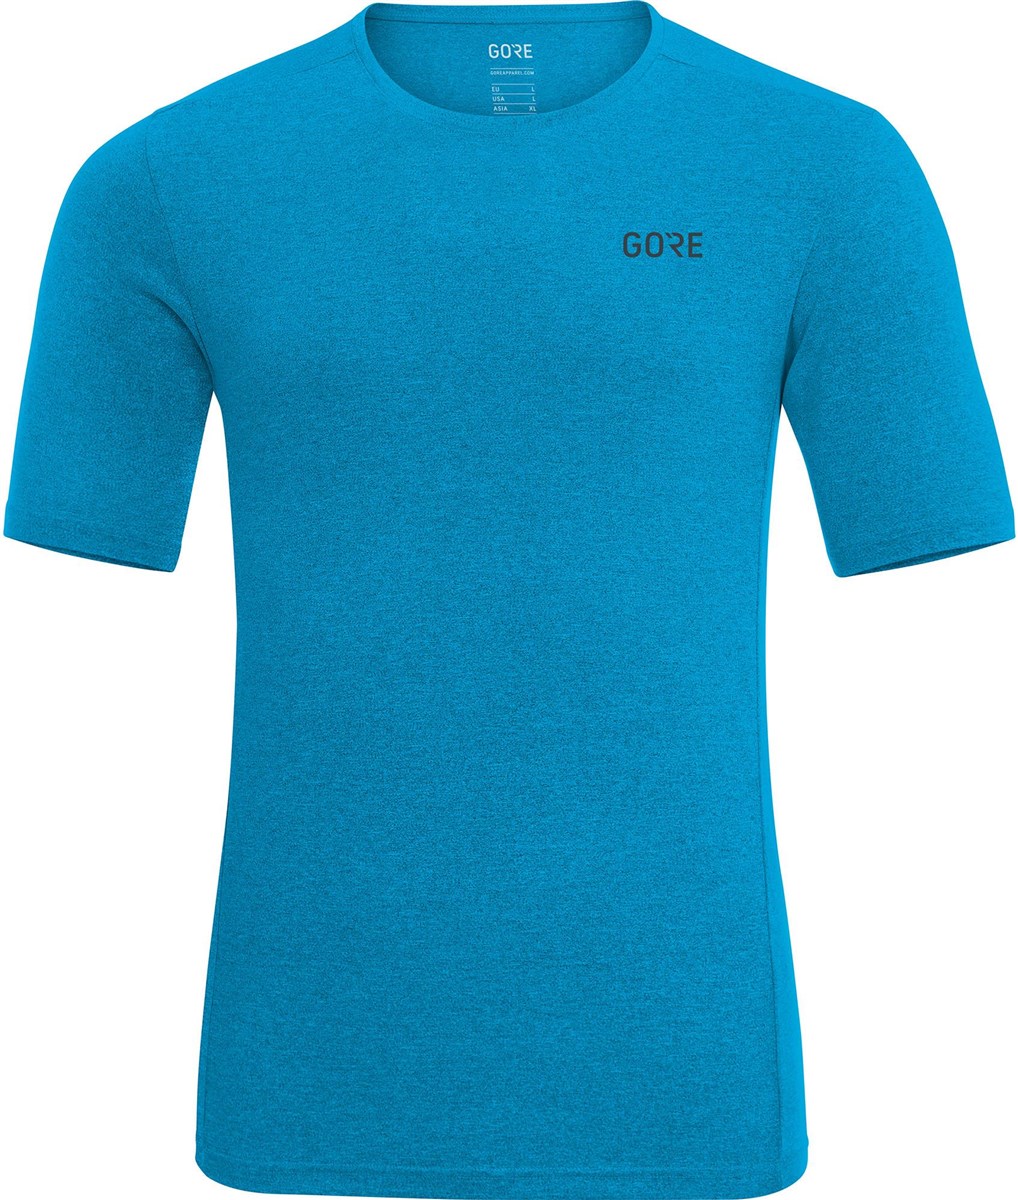 Gore R3 Short Sleeve Jersey product image